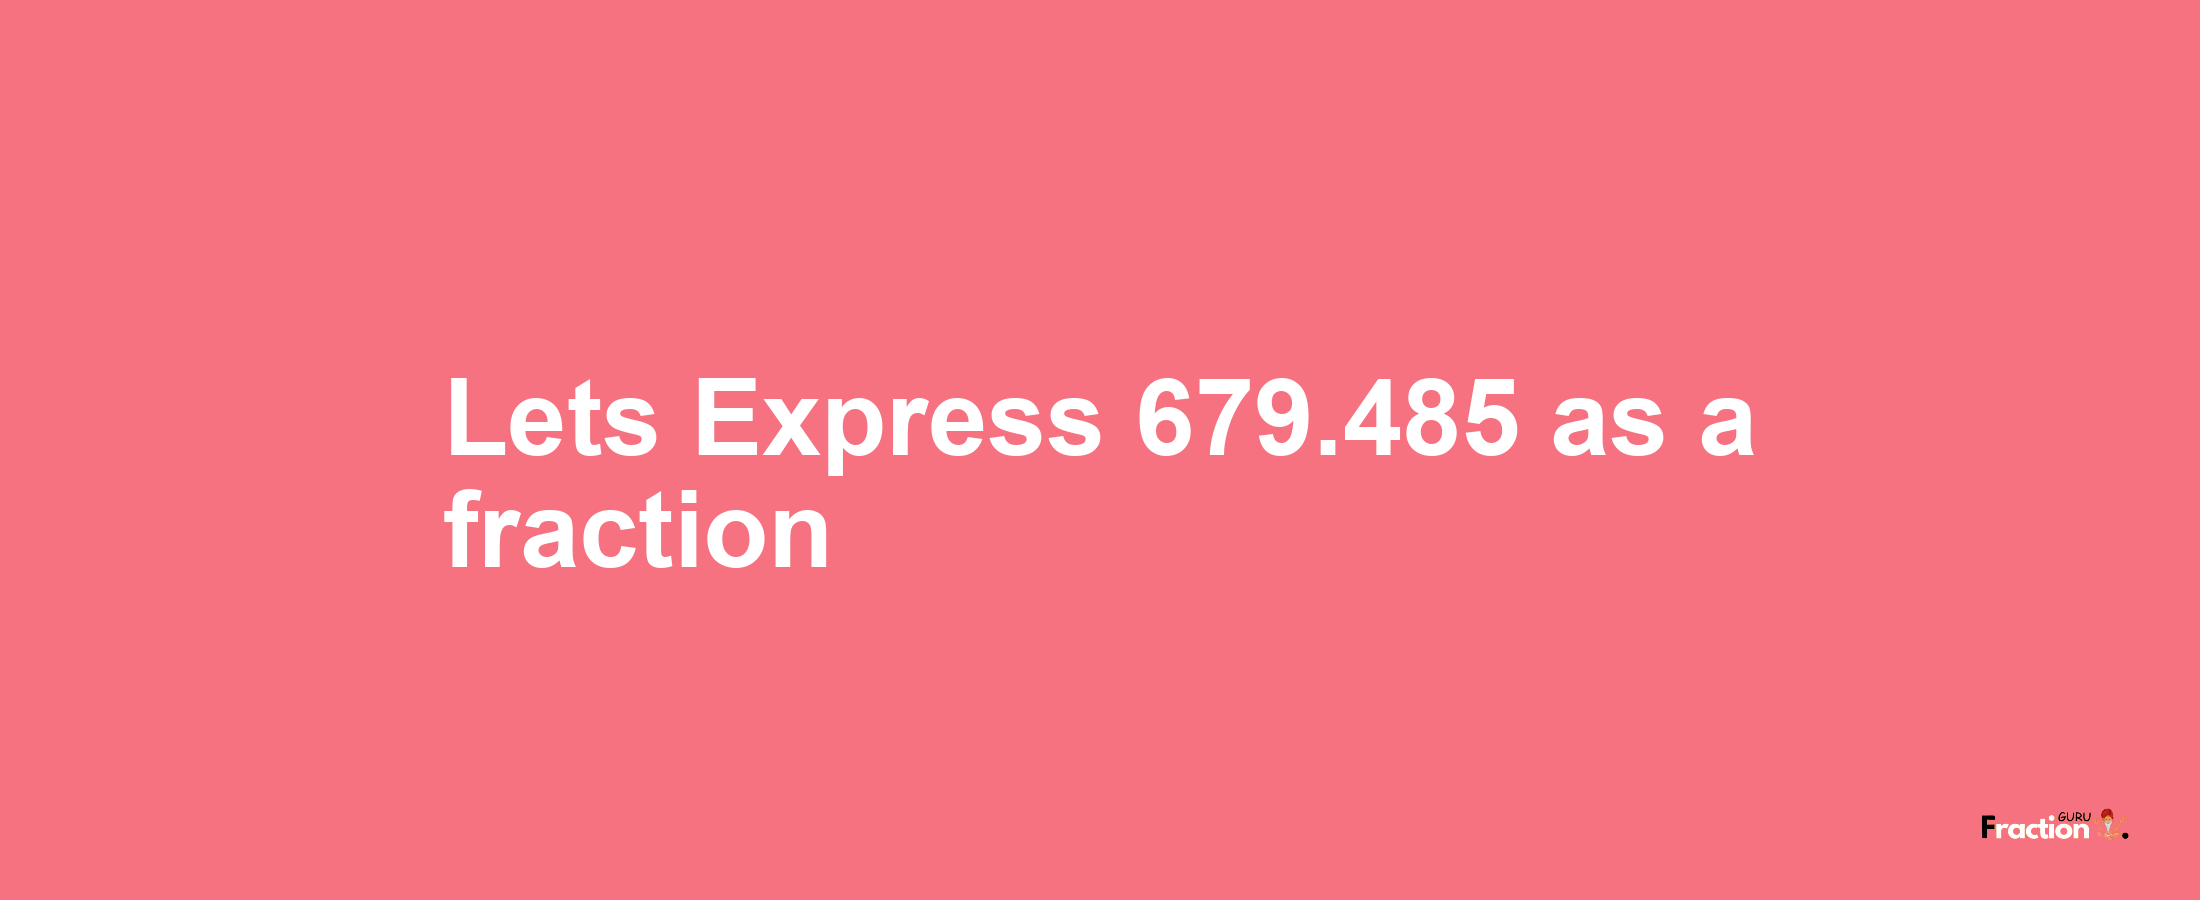 Lets Express 679.485 as afraction